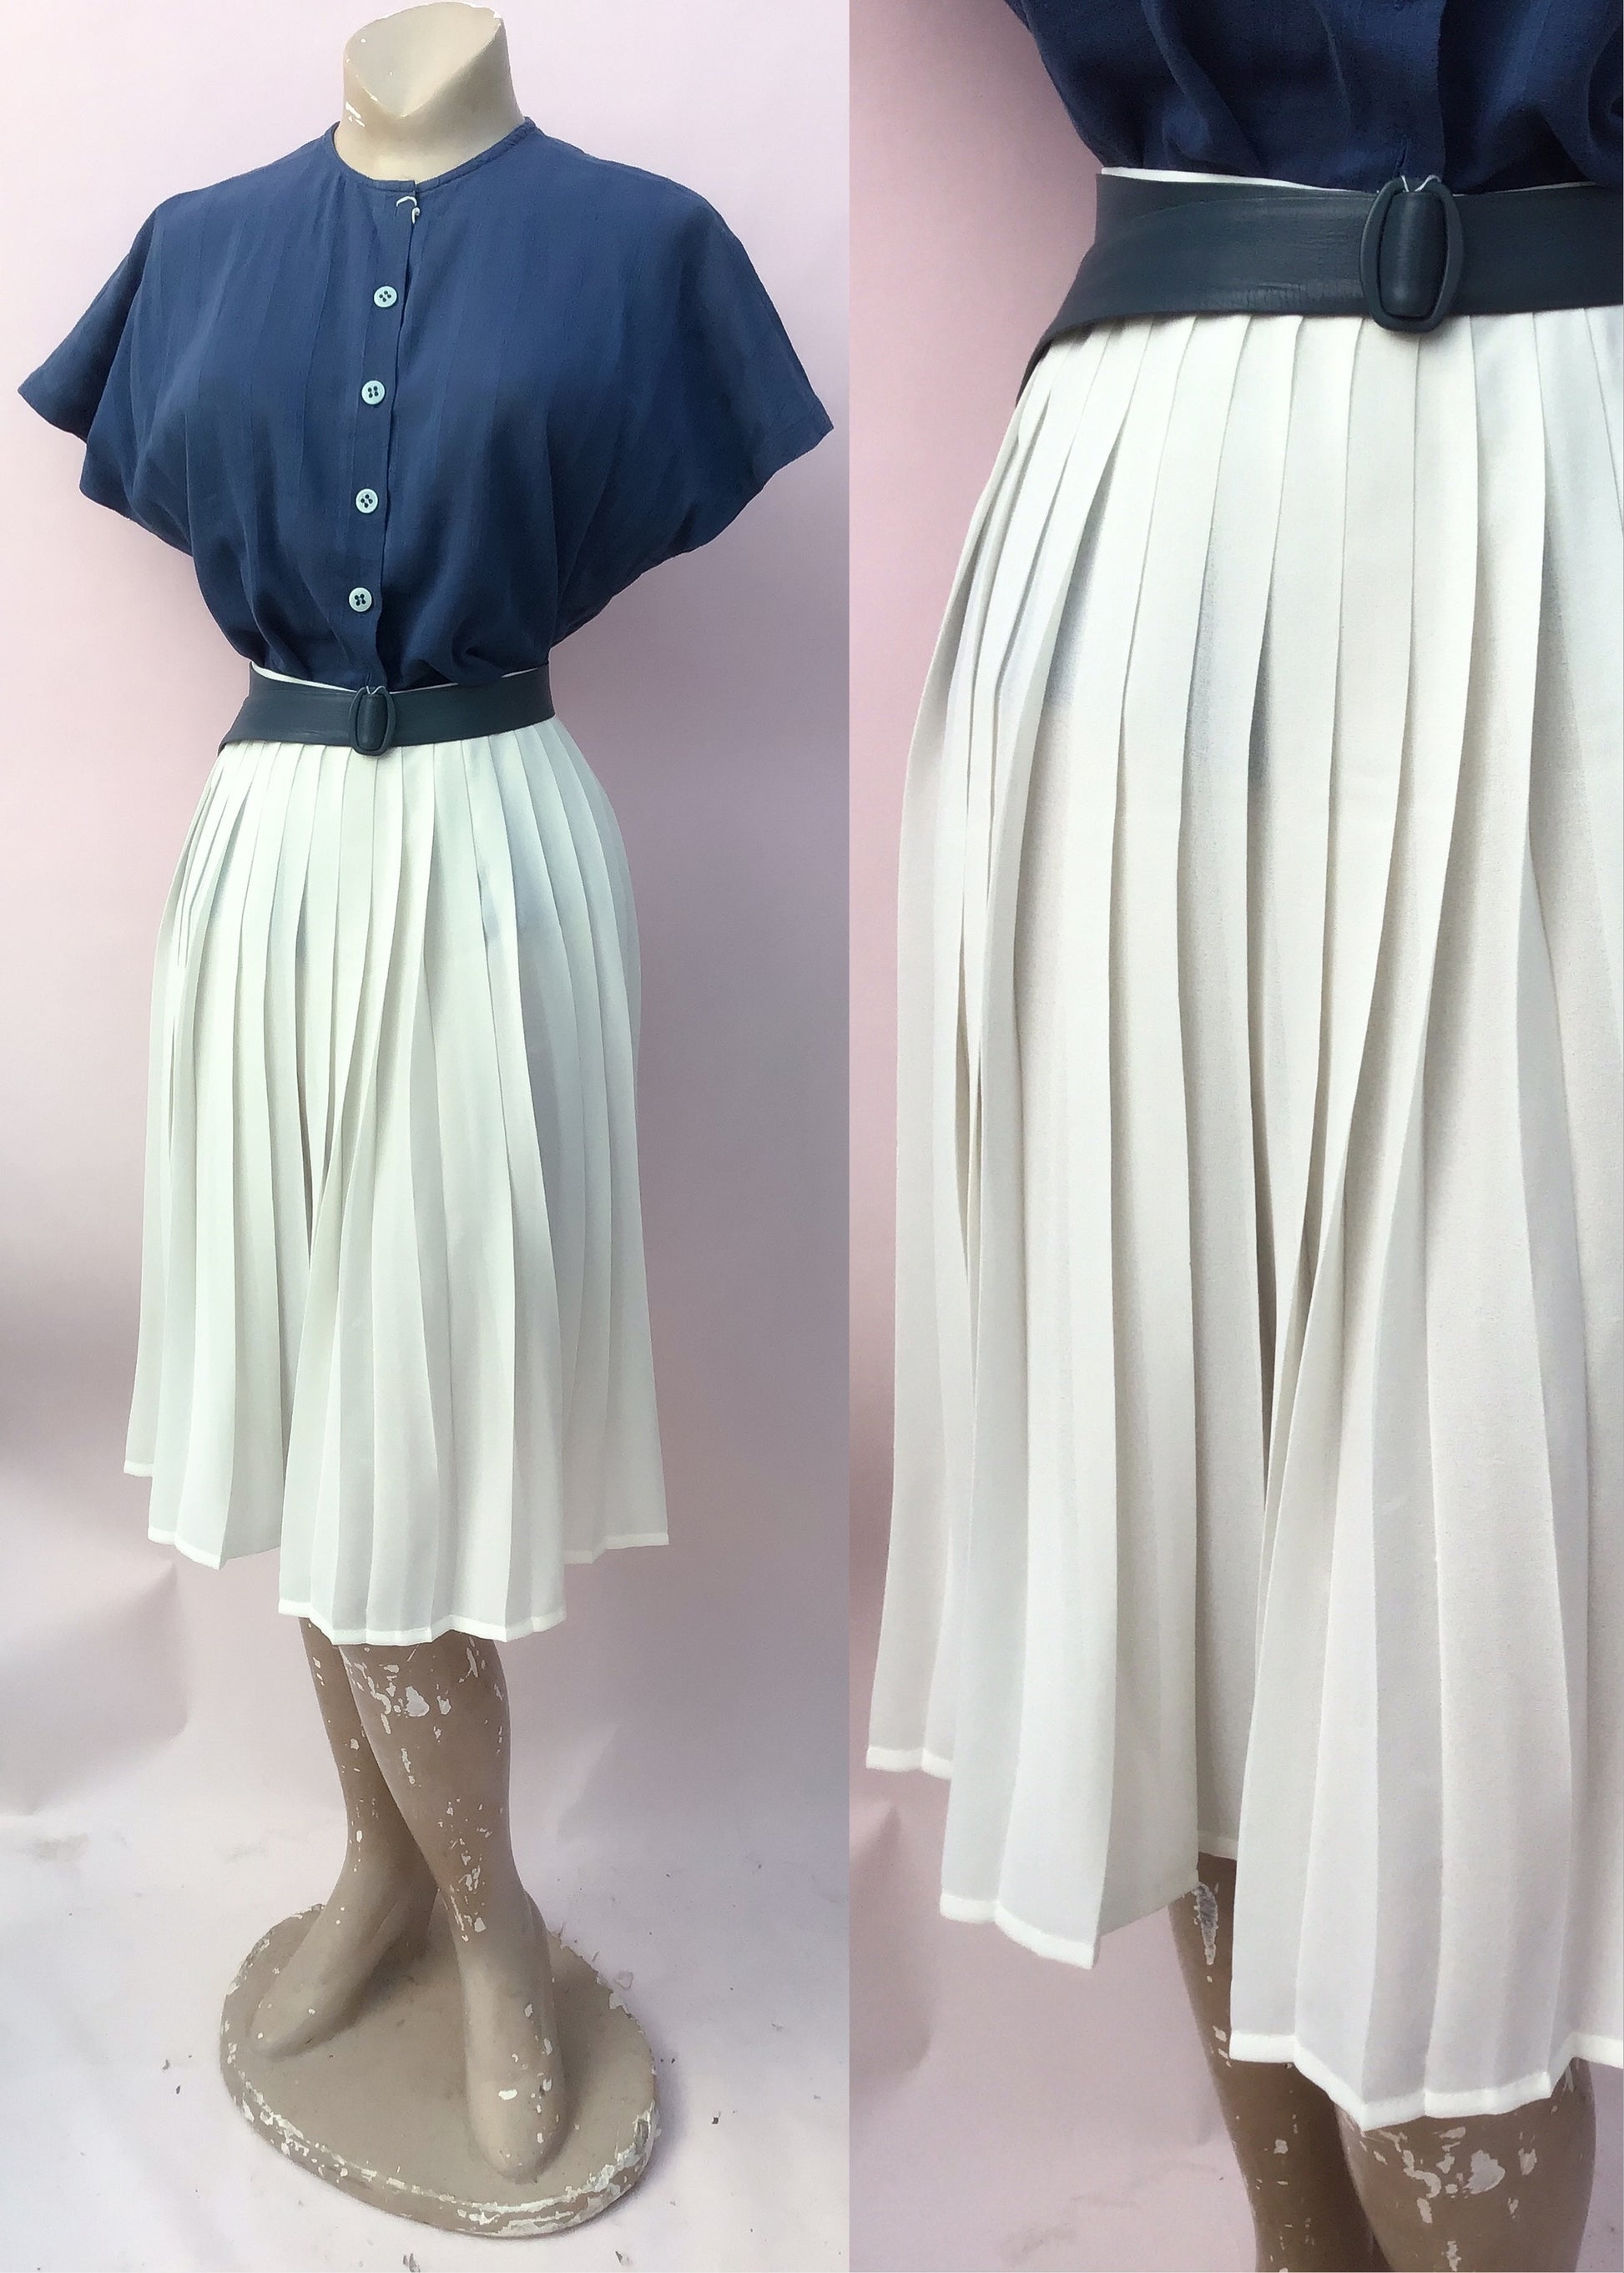 Vintage 70s cream Sunray pleated skirt by st michael. Size 14/16